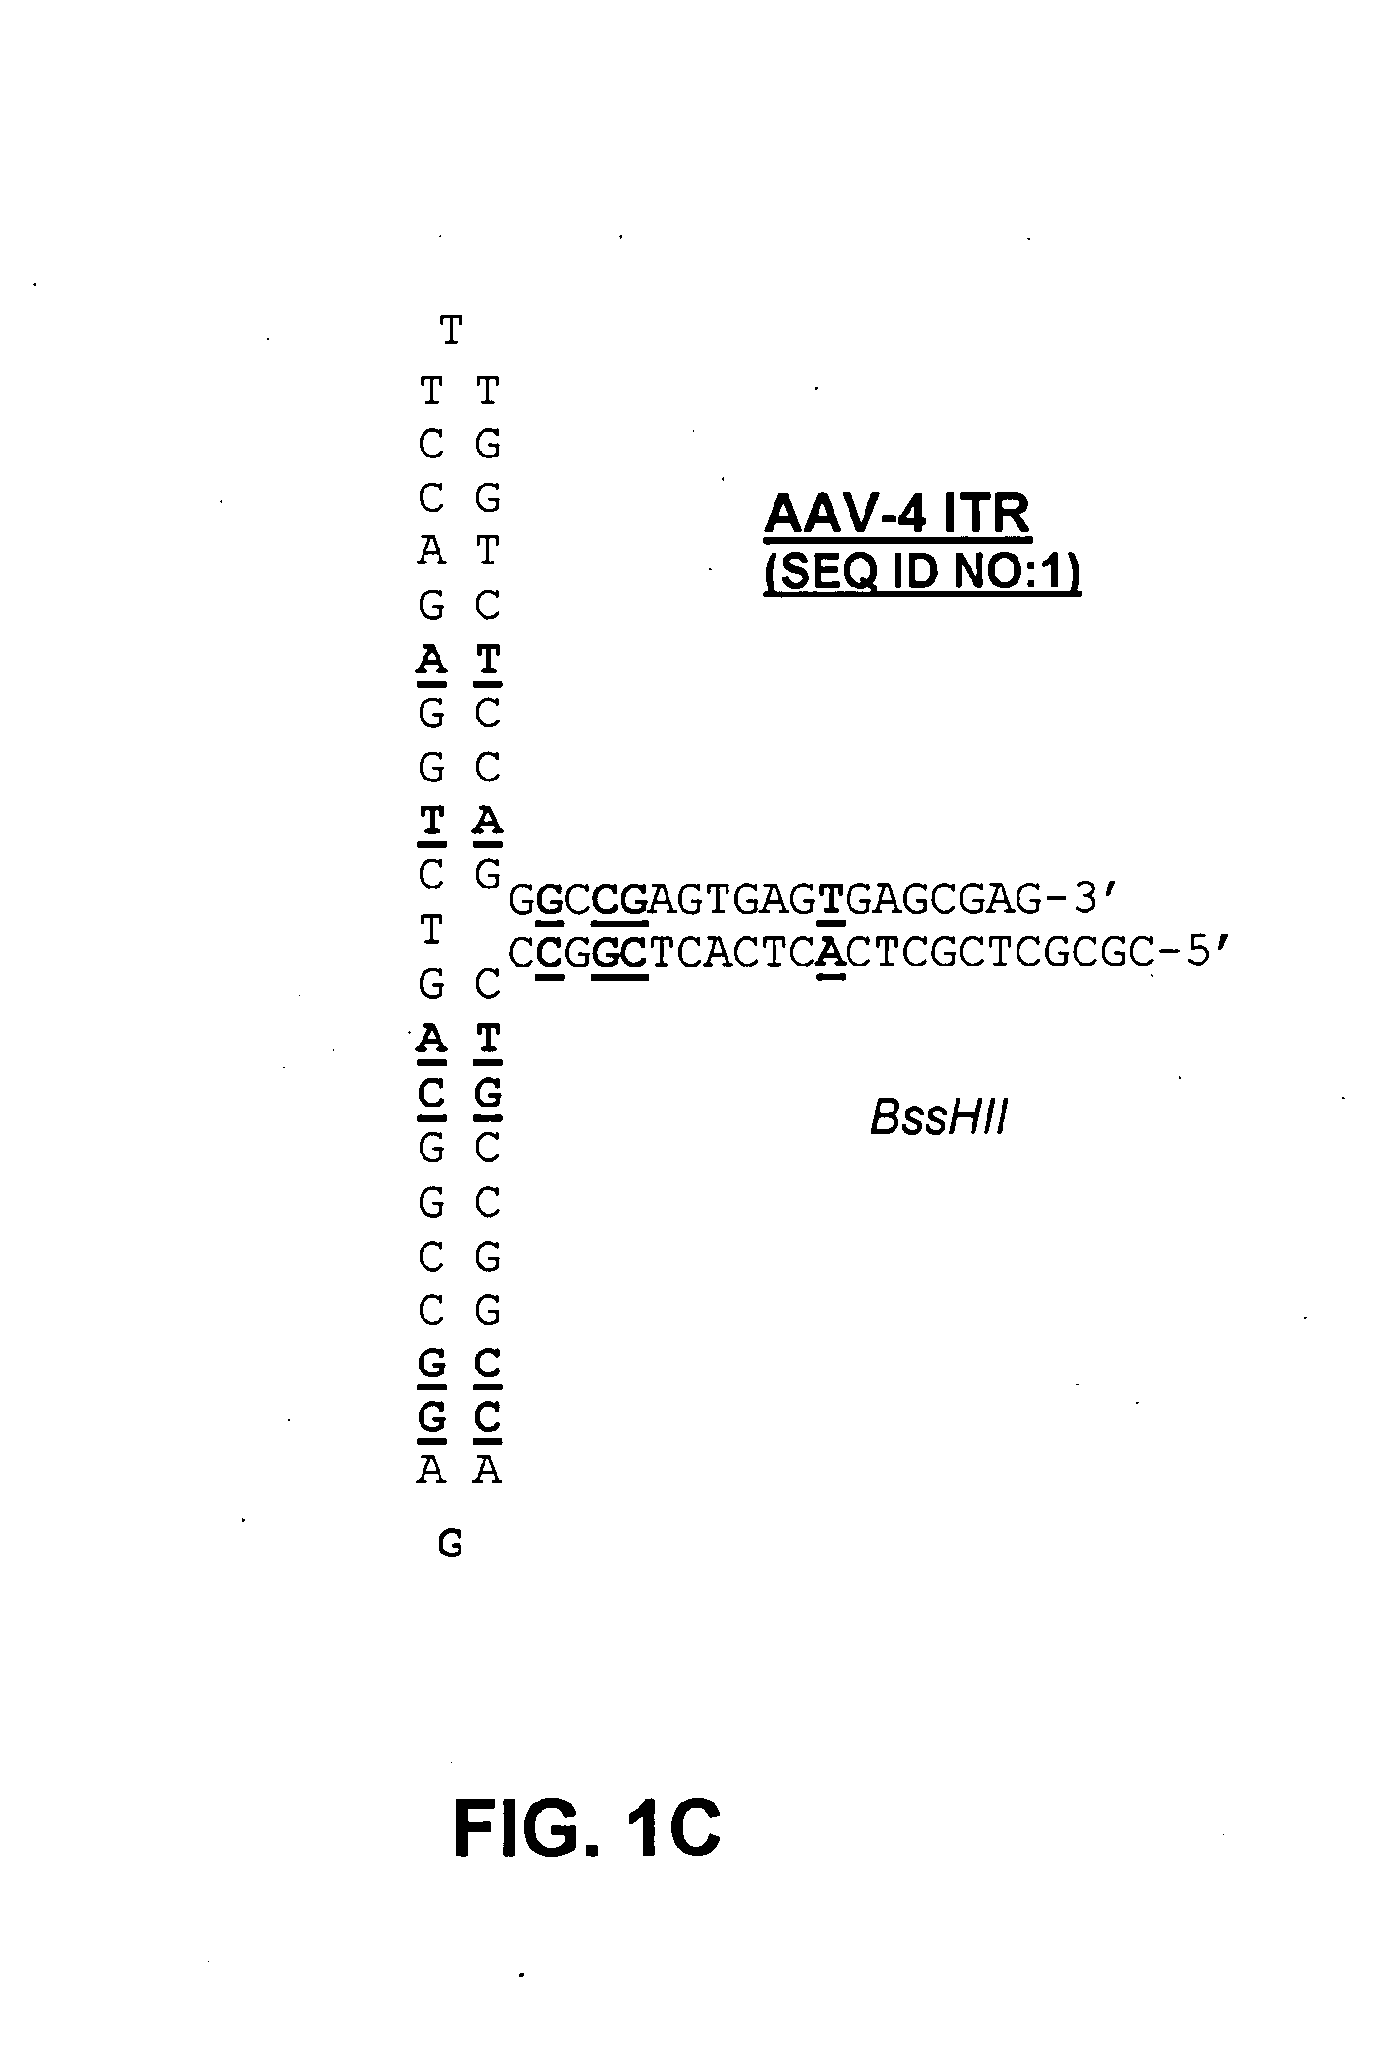 Self-complementary parvoviral vectors, and methods for making and using the same